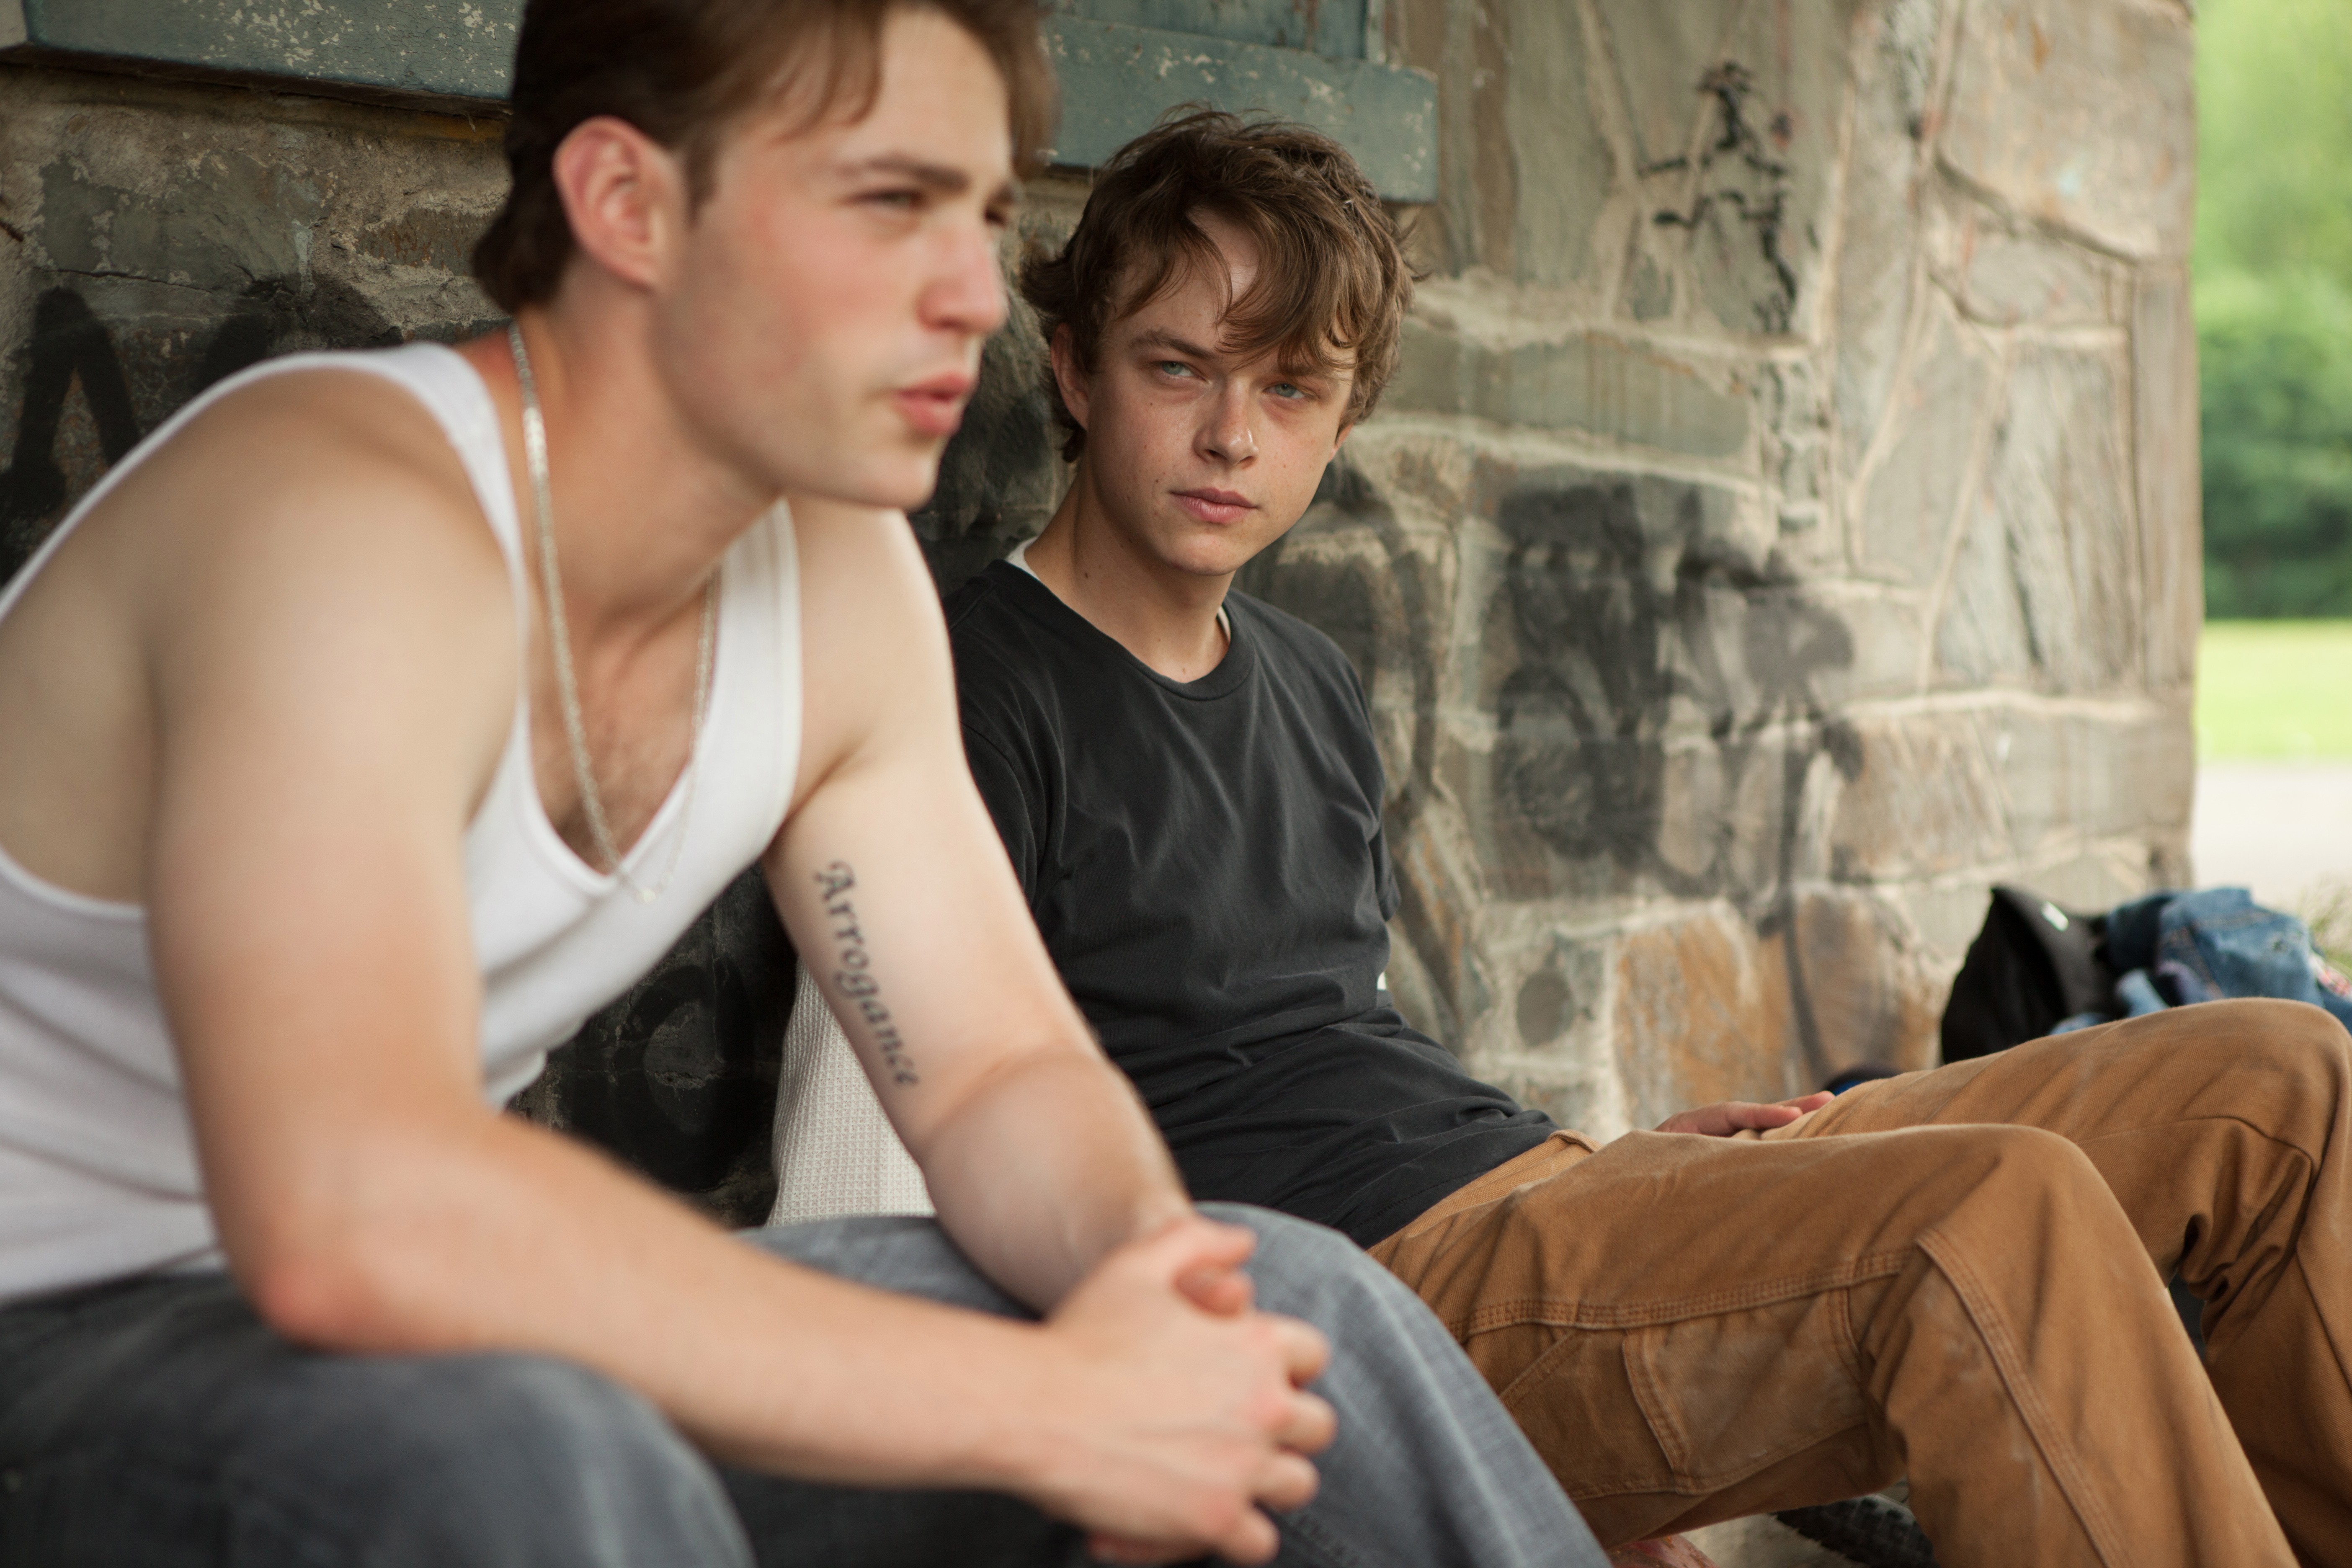 Dane DeHaan Jason The Place Beyond The Pines Emory Cohen AJ The Place Beyond The Pines 5616x3744